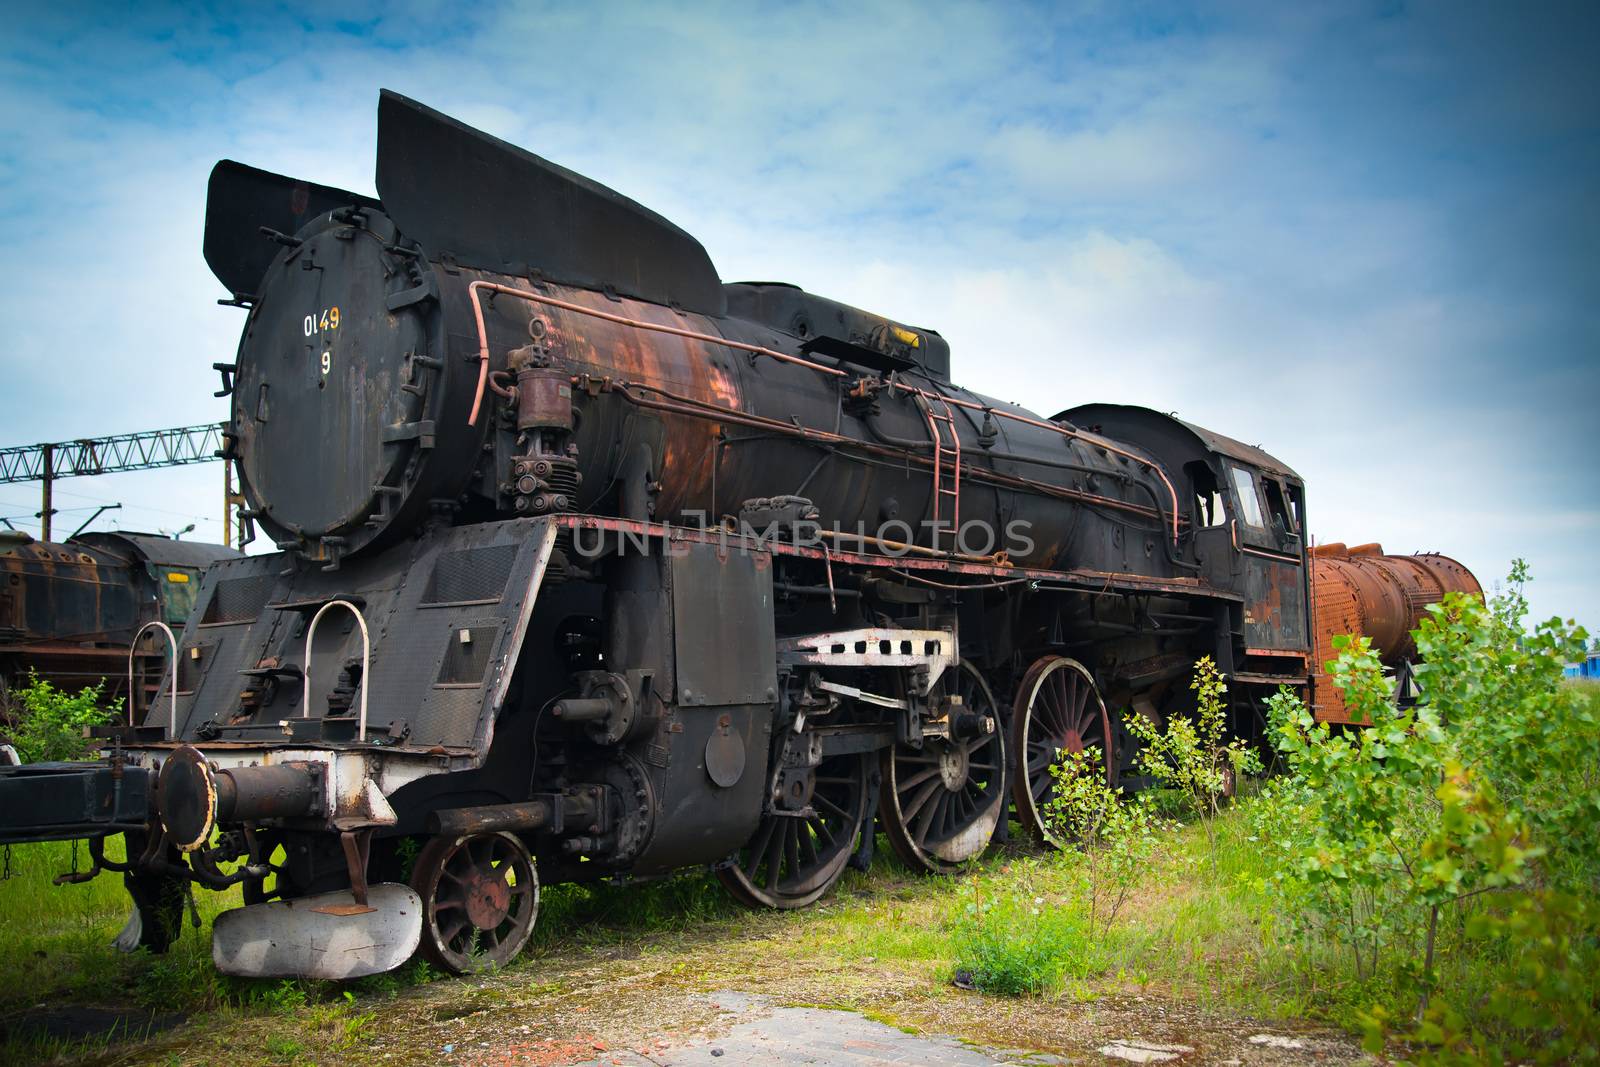 An old locomotive - unused and rusty